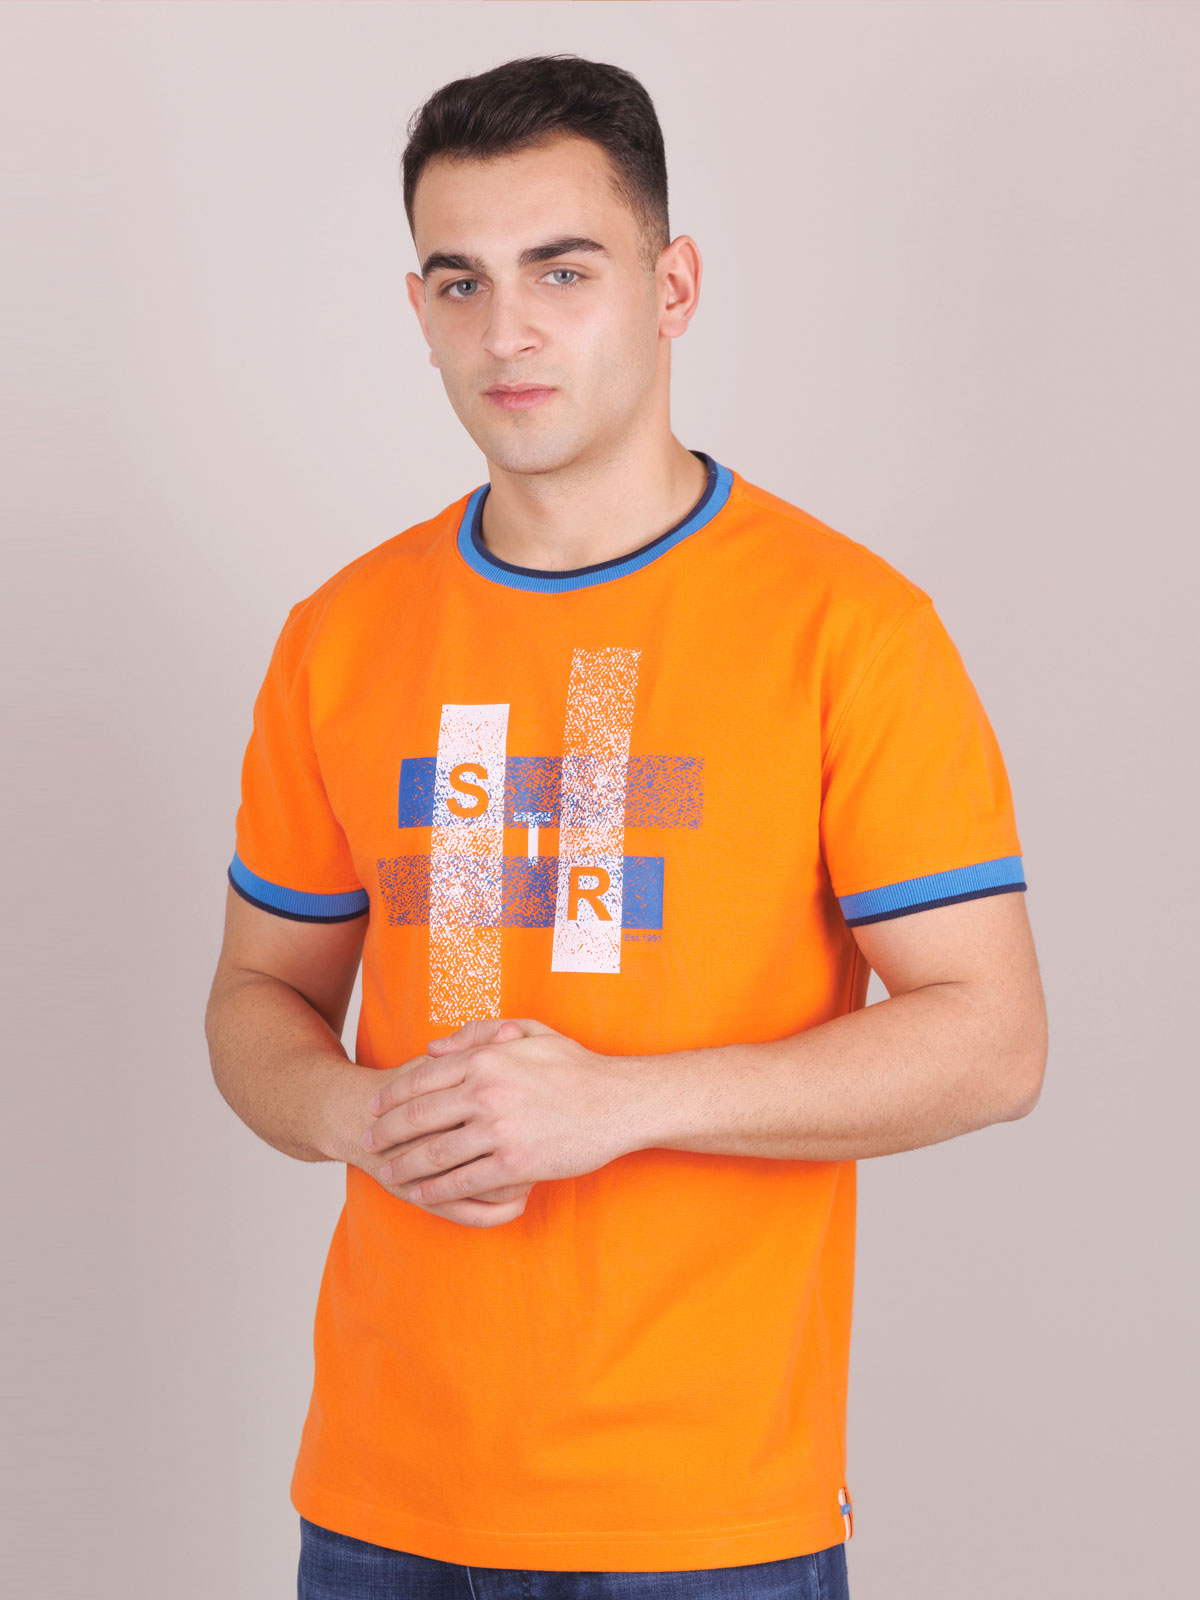 Tshirt in orange with a print - 95363 € 19.12 img4